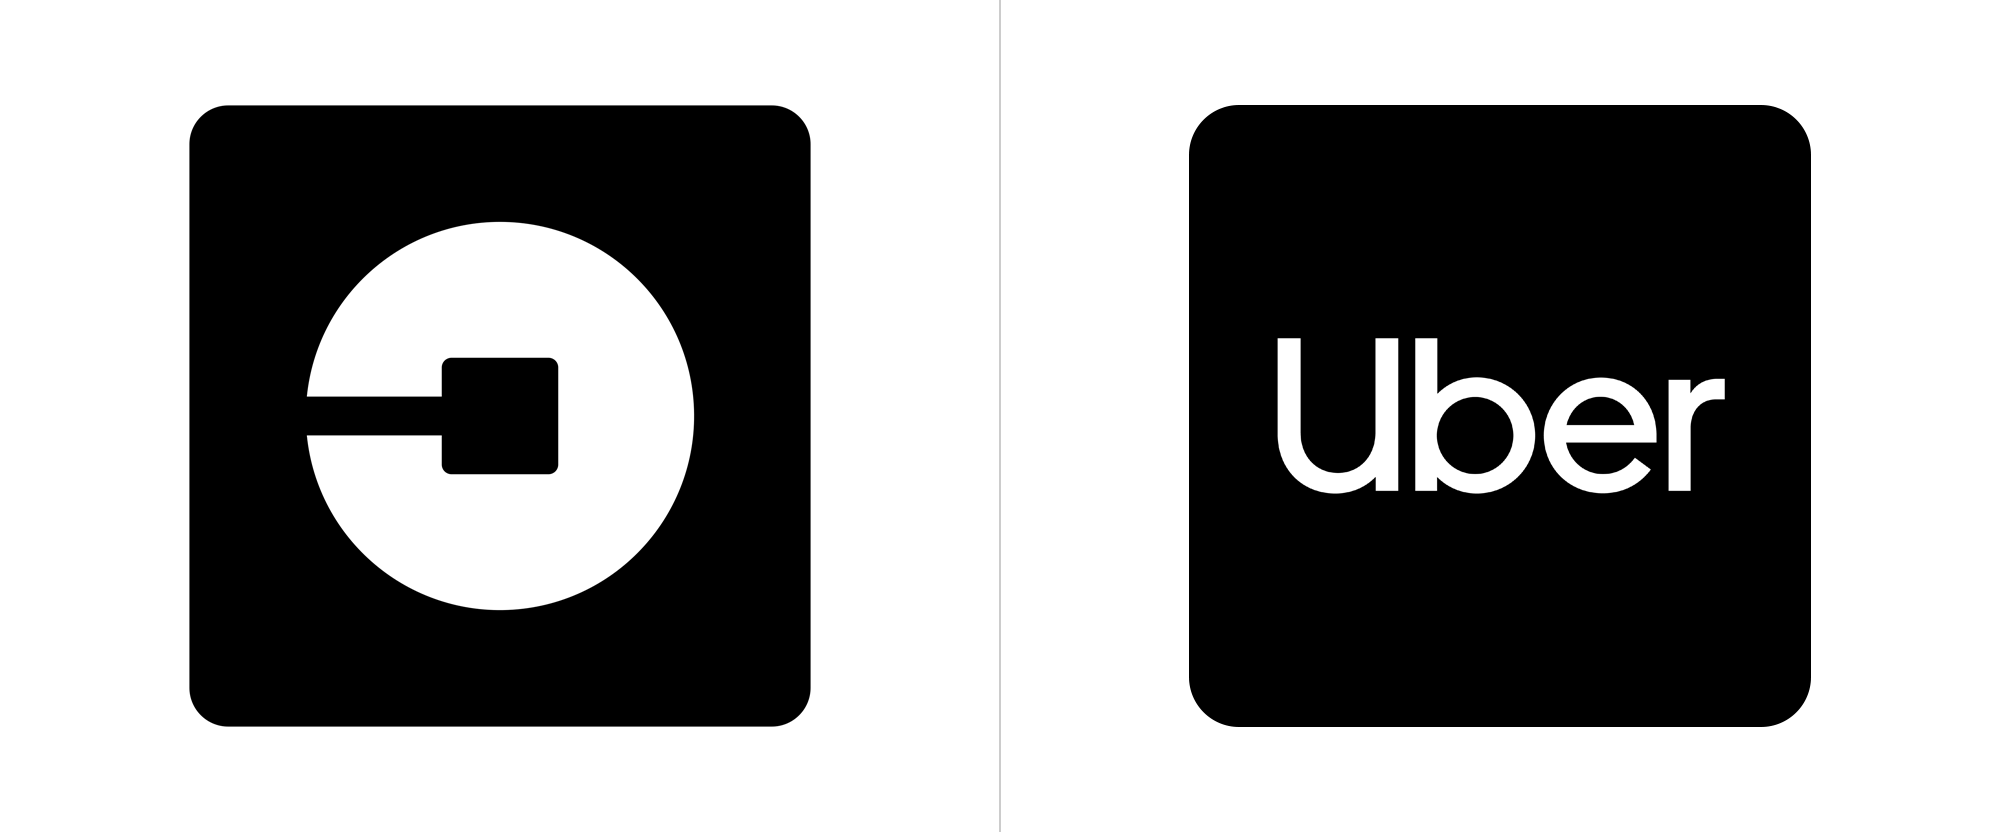 Uber Logo - Brand New: New Logo and Identity for Uber by Wolff Olins and In-house